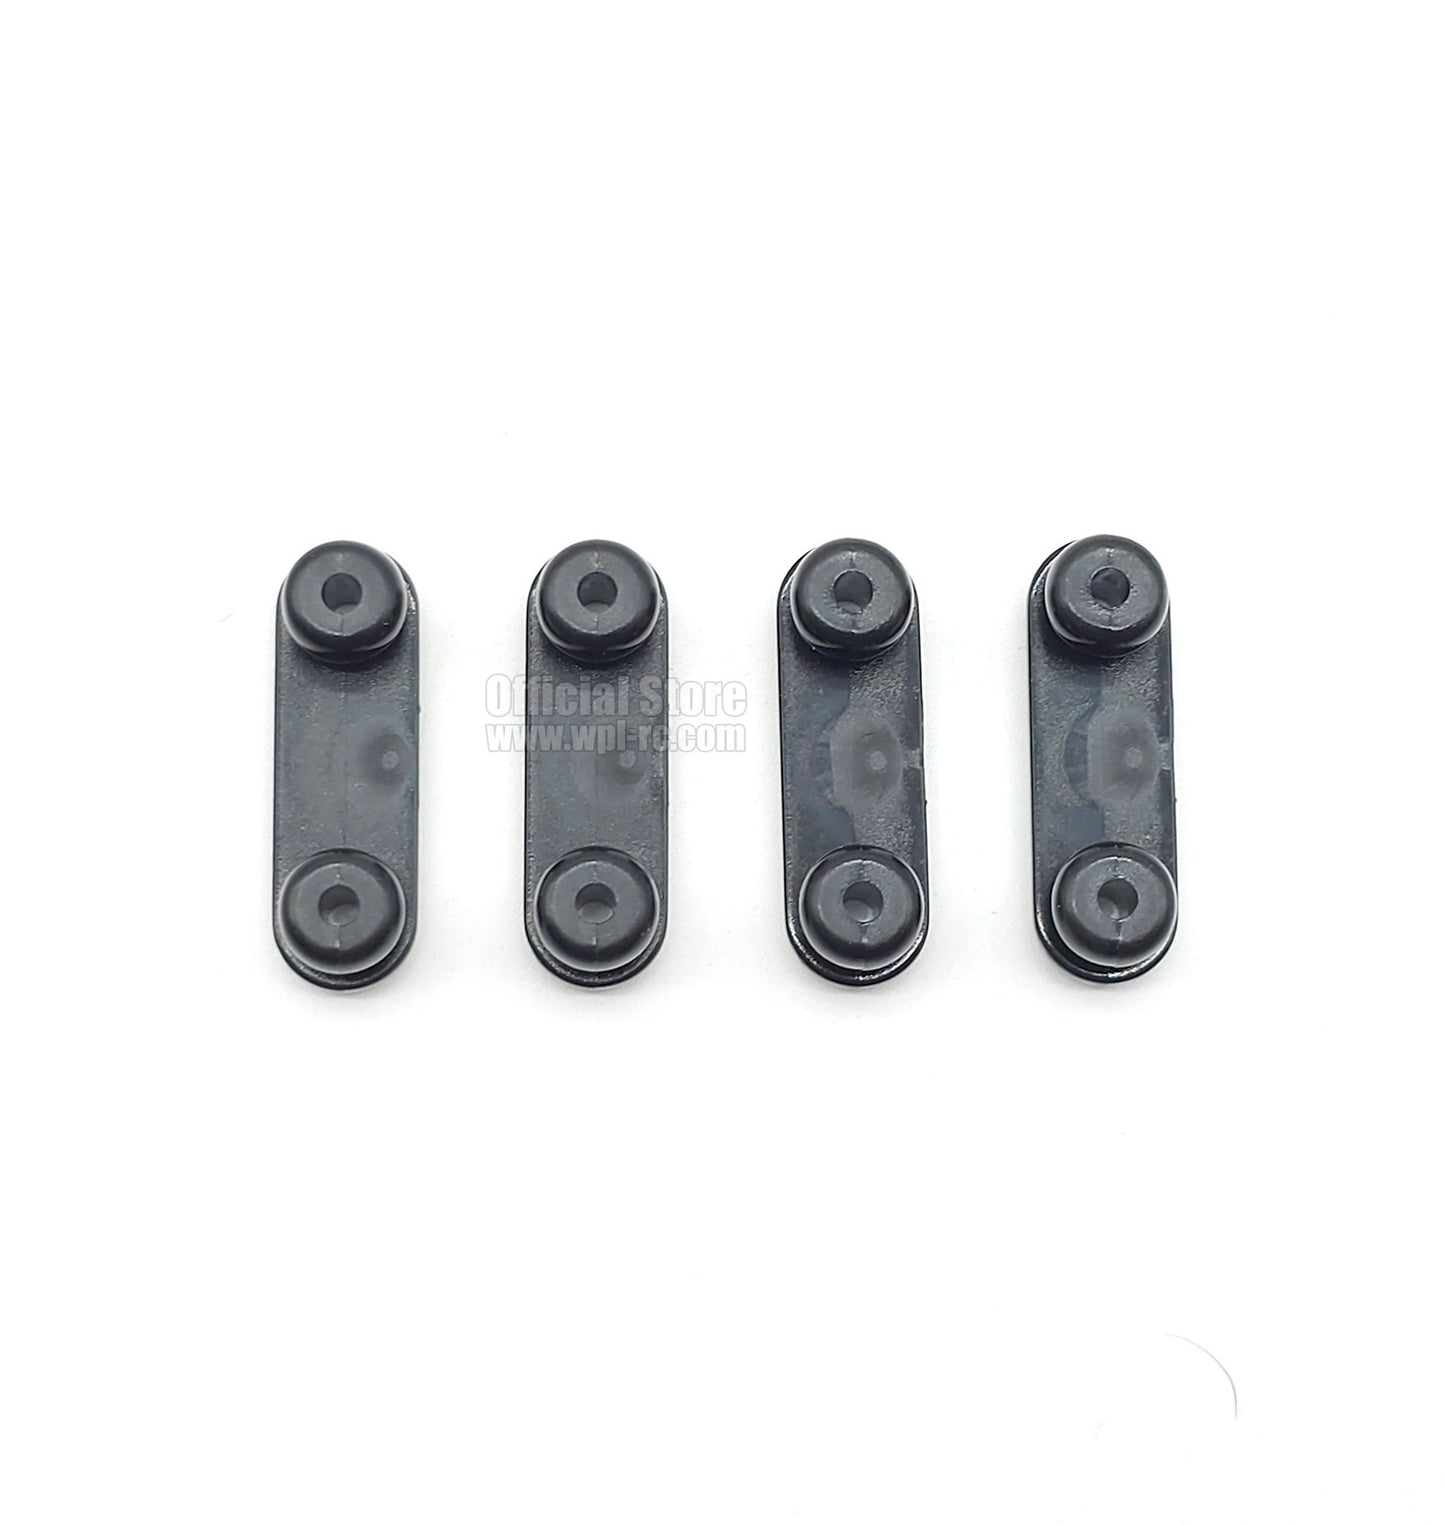 C54 Plastic Double Ball Ends